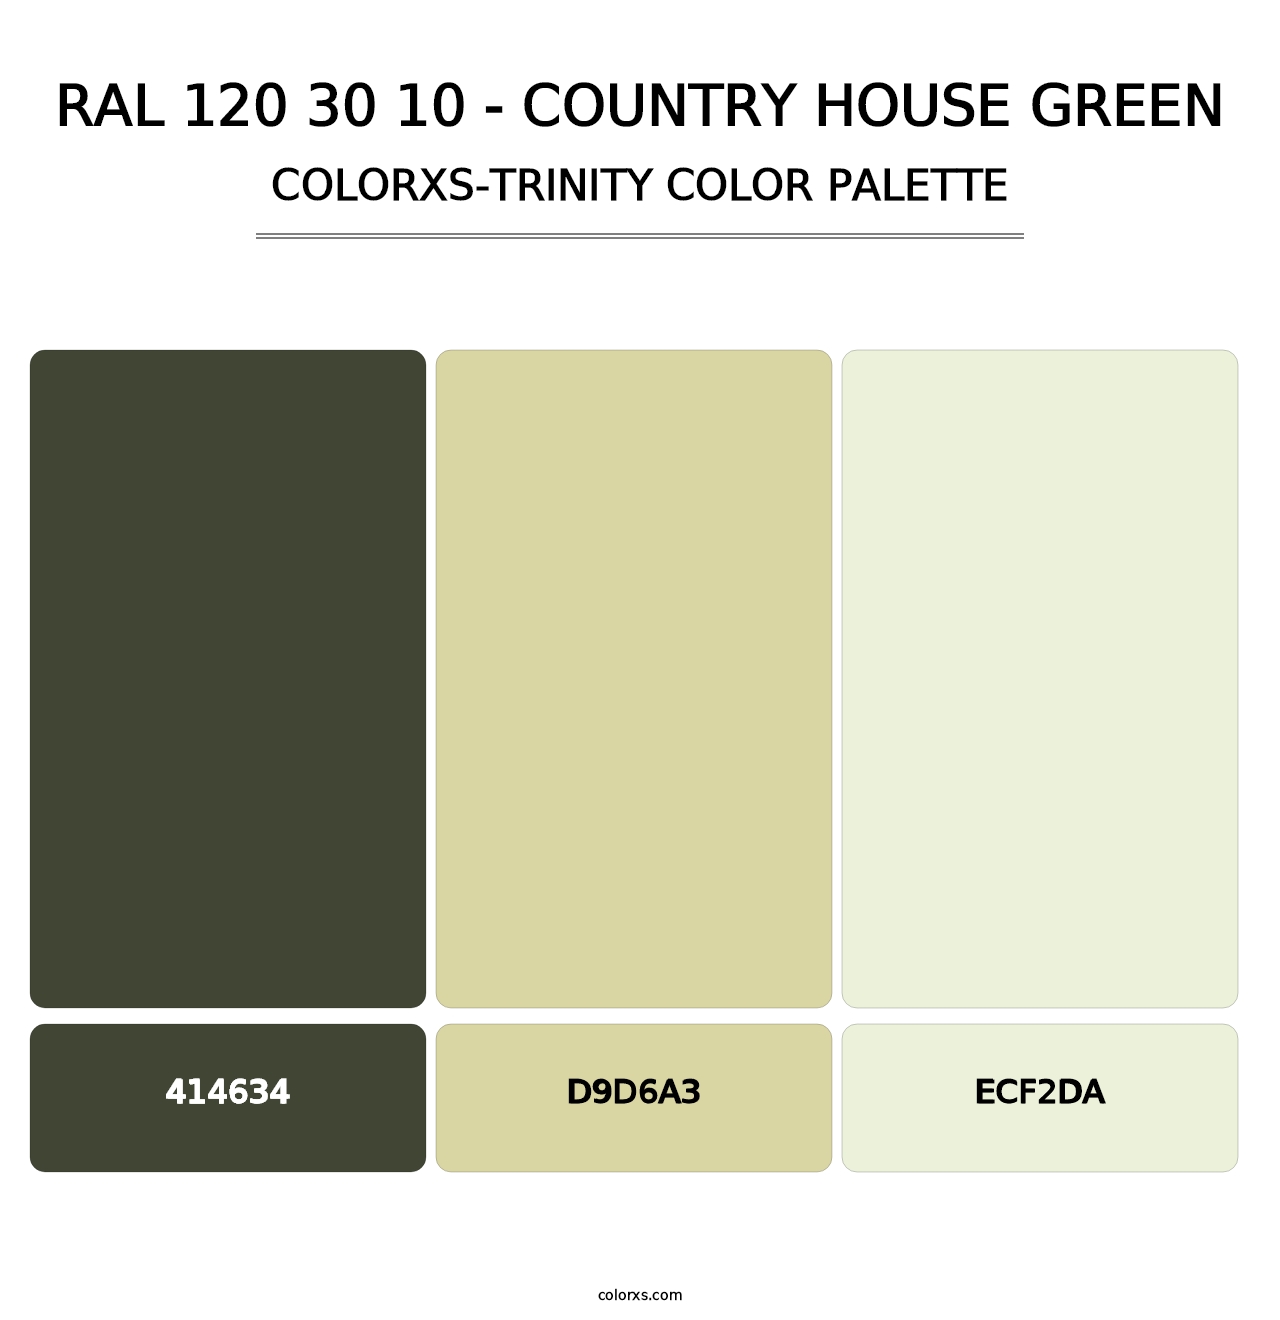 RAL 120 30 10 - Country House Green - Colorxs Trinity Palette